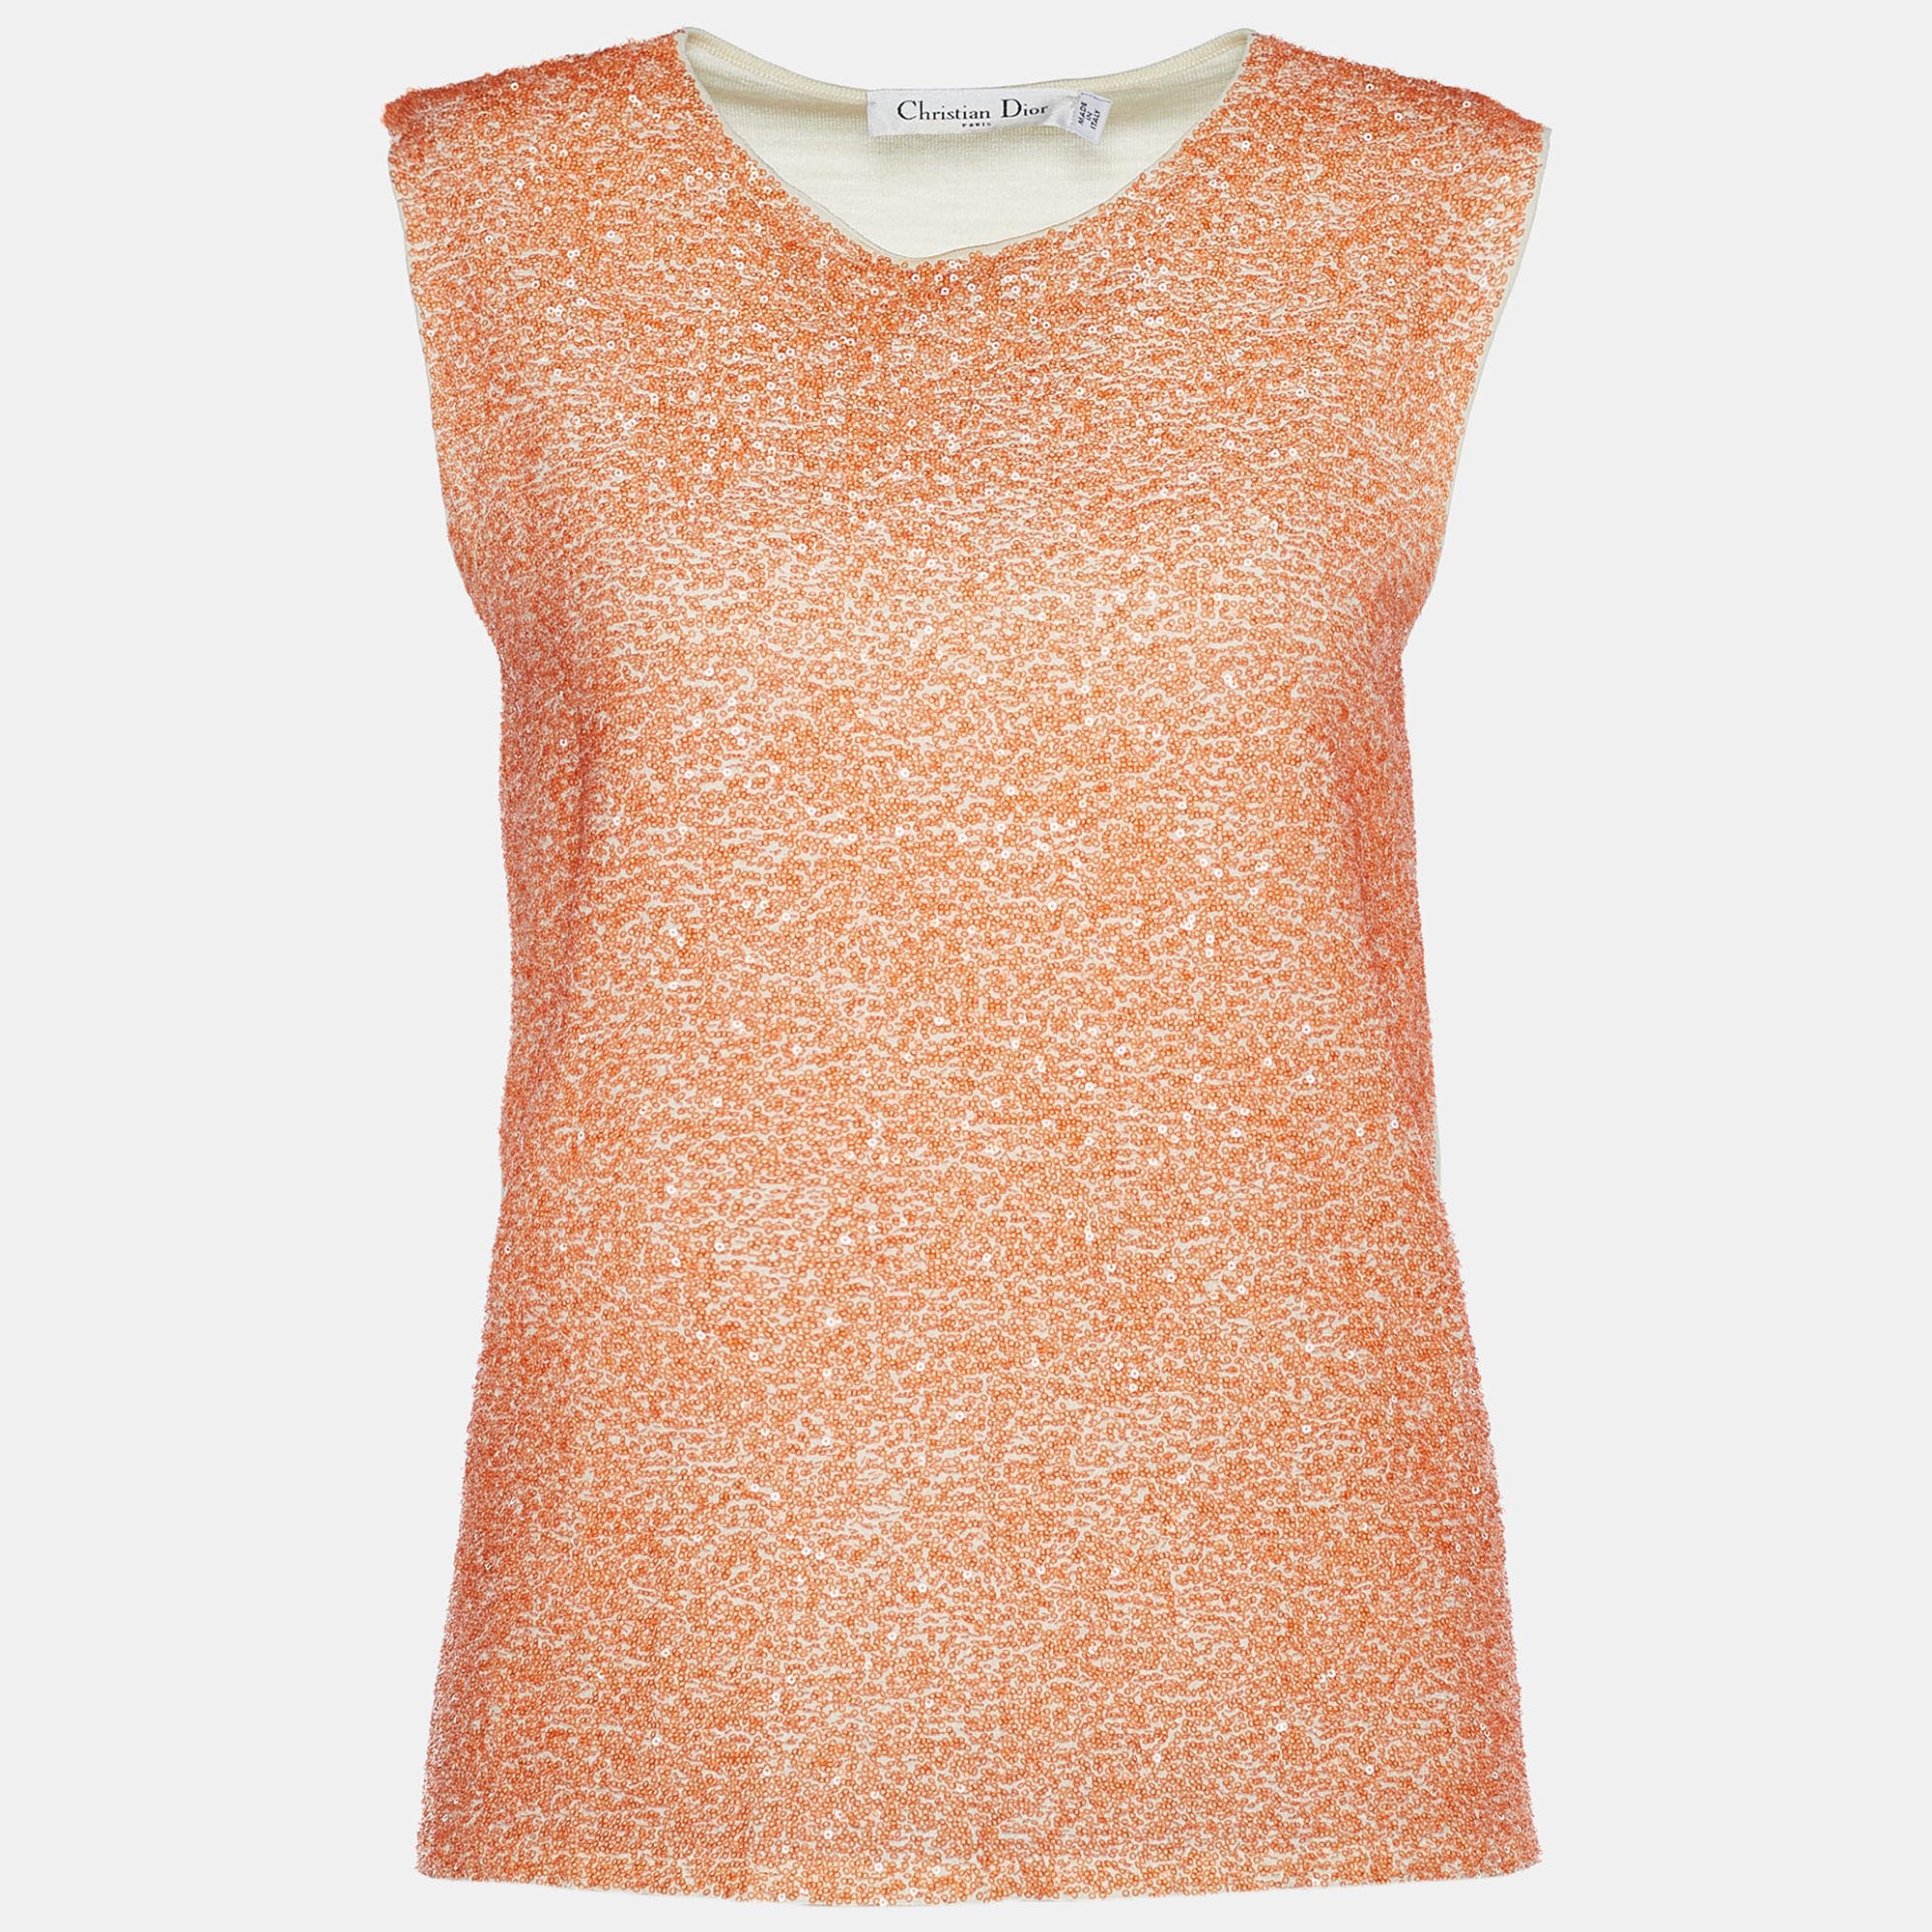 Pre-owned Dior Orange Sequinned Cashmere Silk Sleeveless Top M